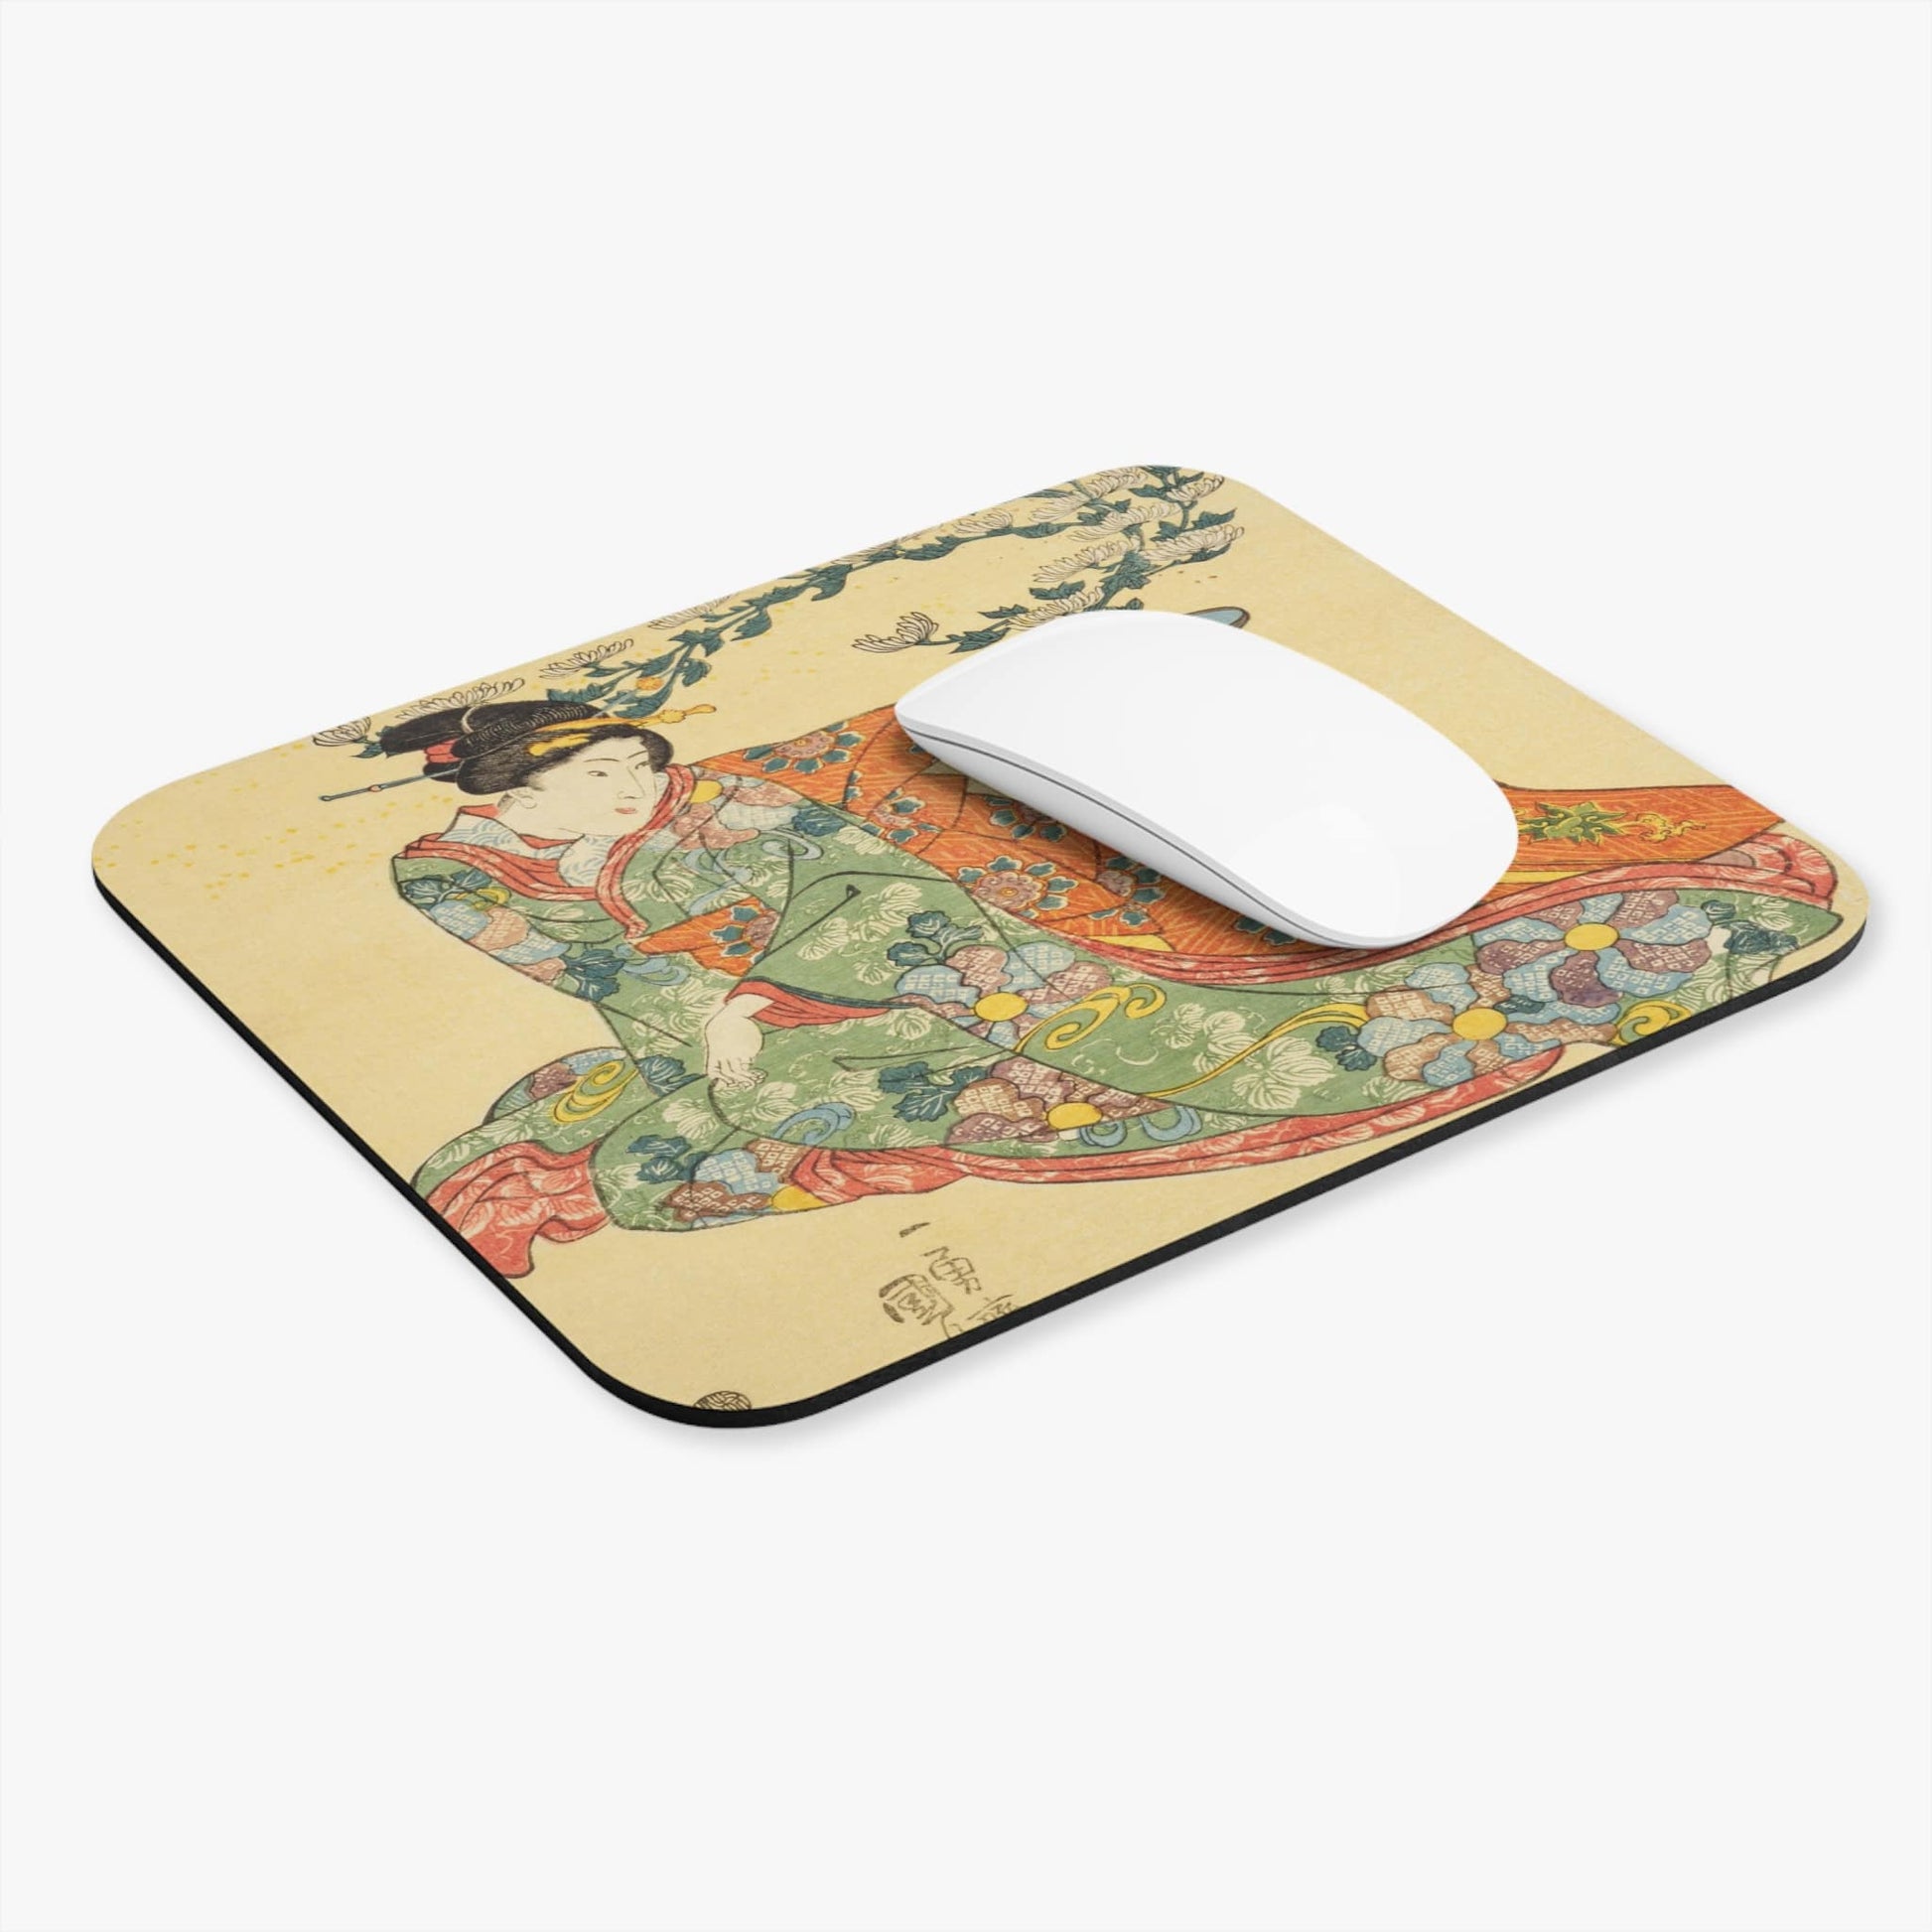 Japanese Aesthetic Computer Desk Mouse Pad With White Mouse